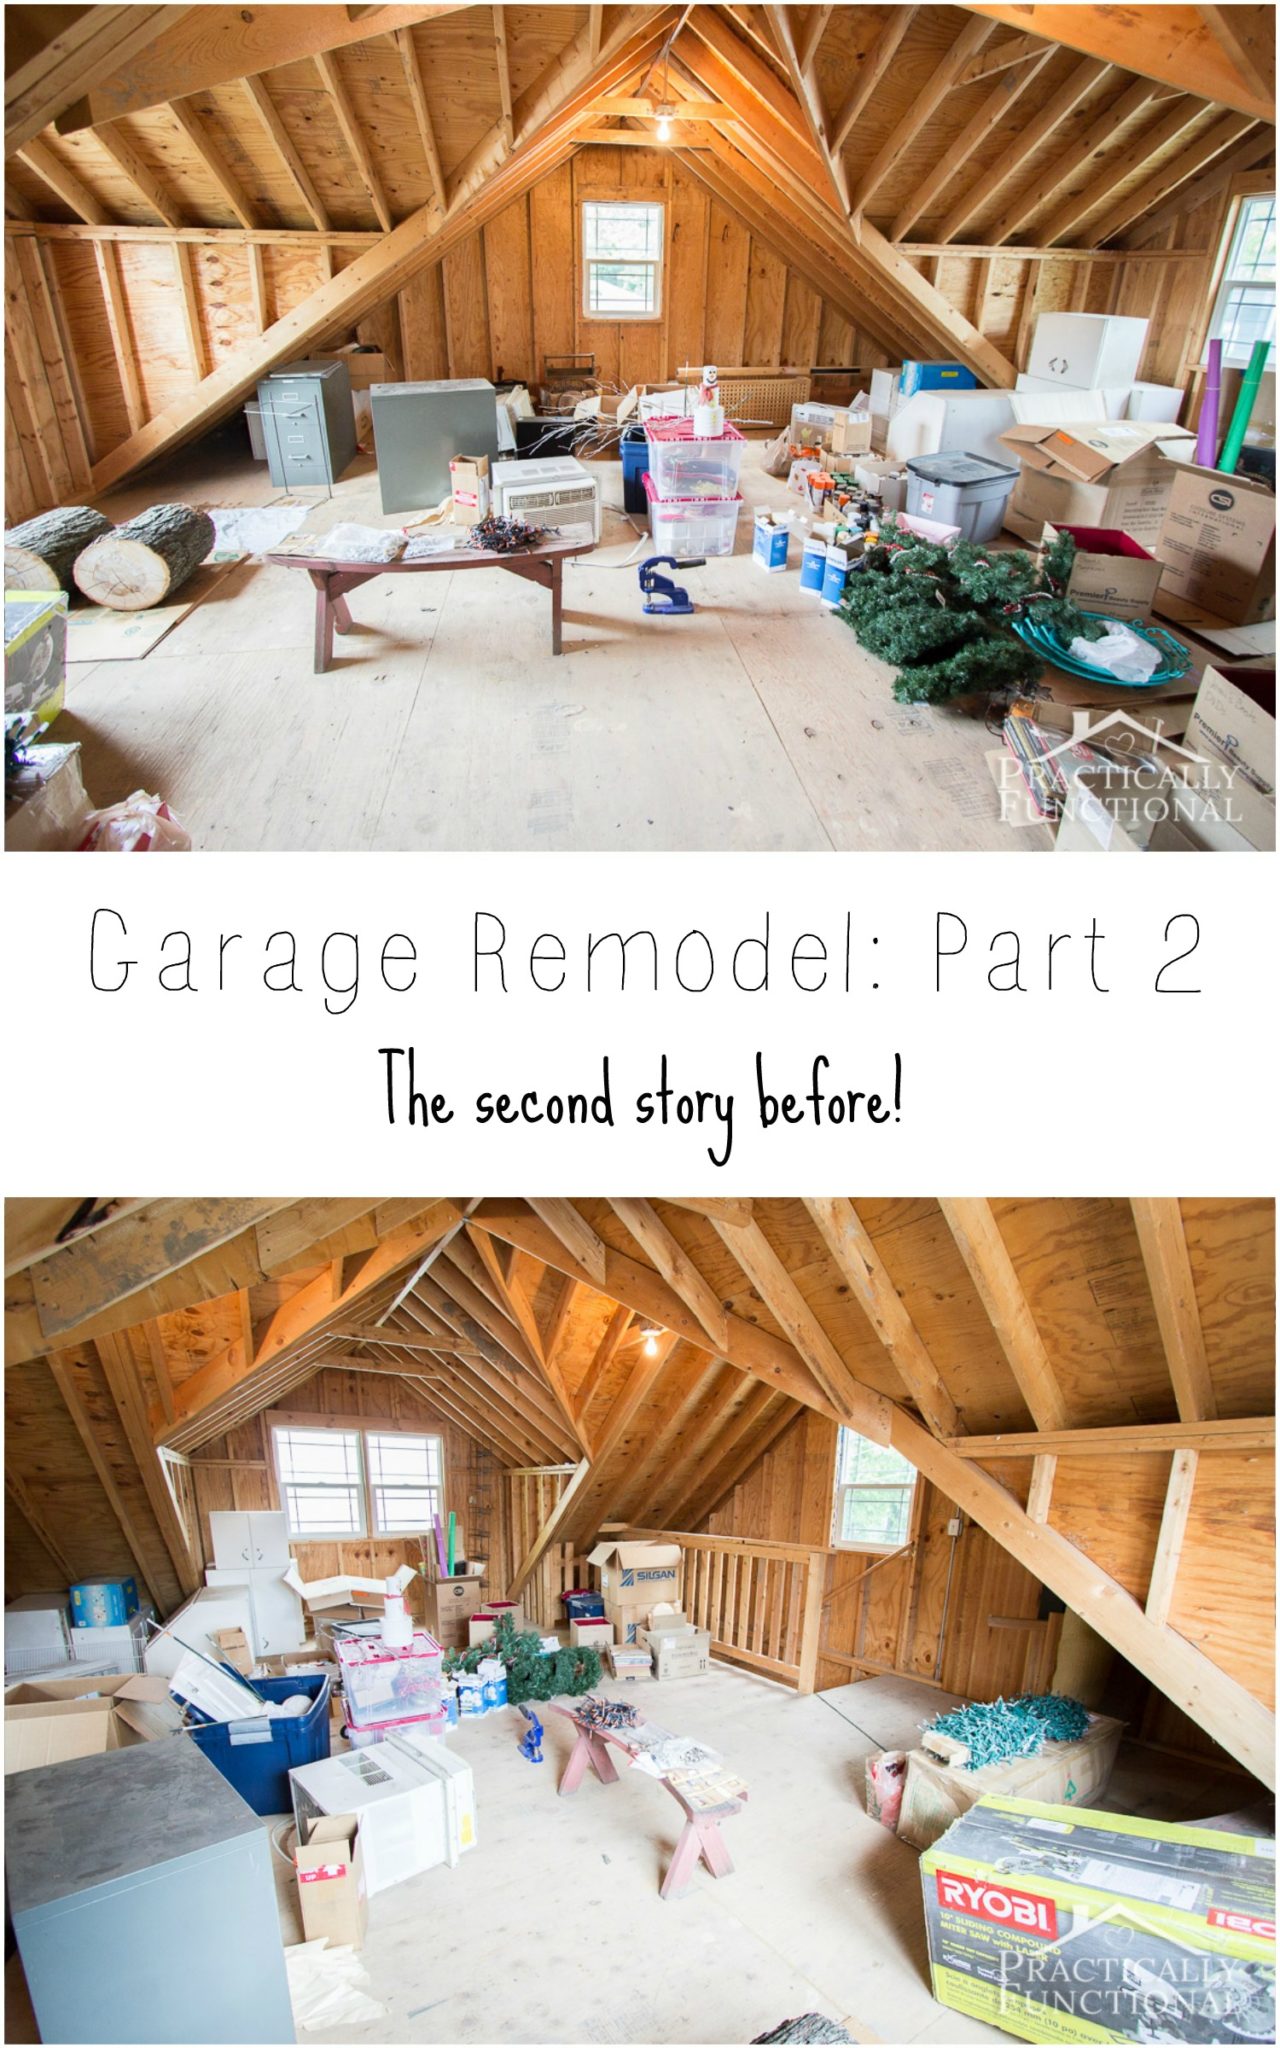 Garage Remodel Plans: The second story before! I plan to turn this space into a home office and craft room!